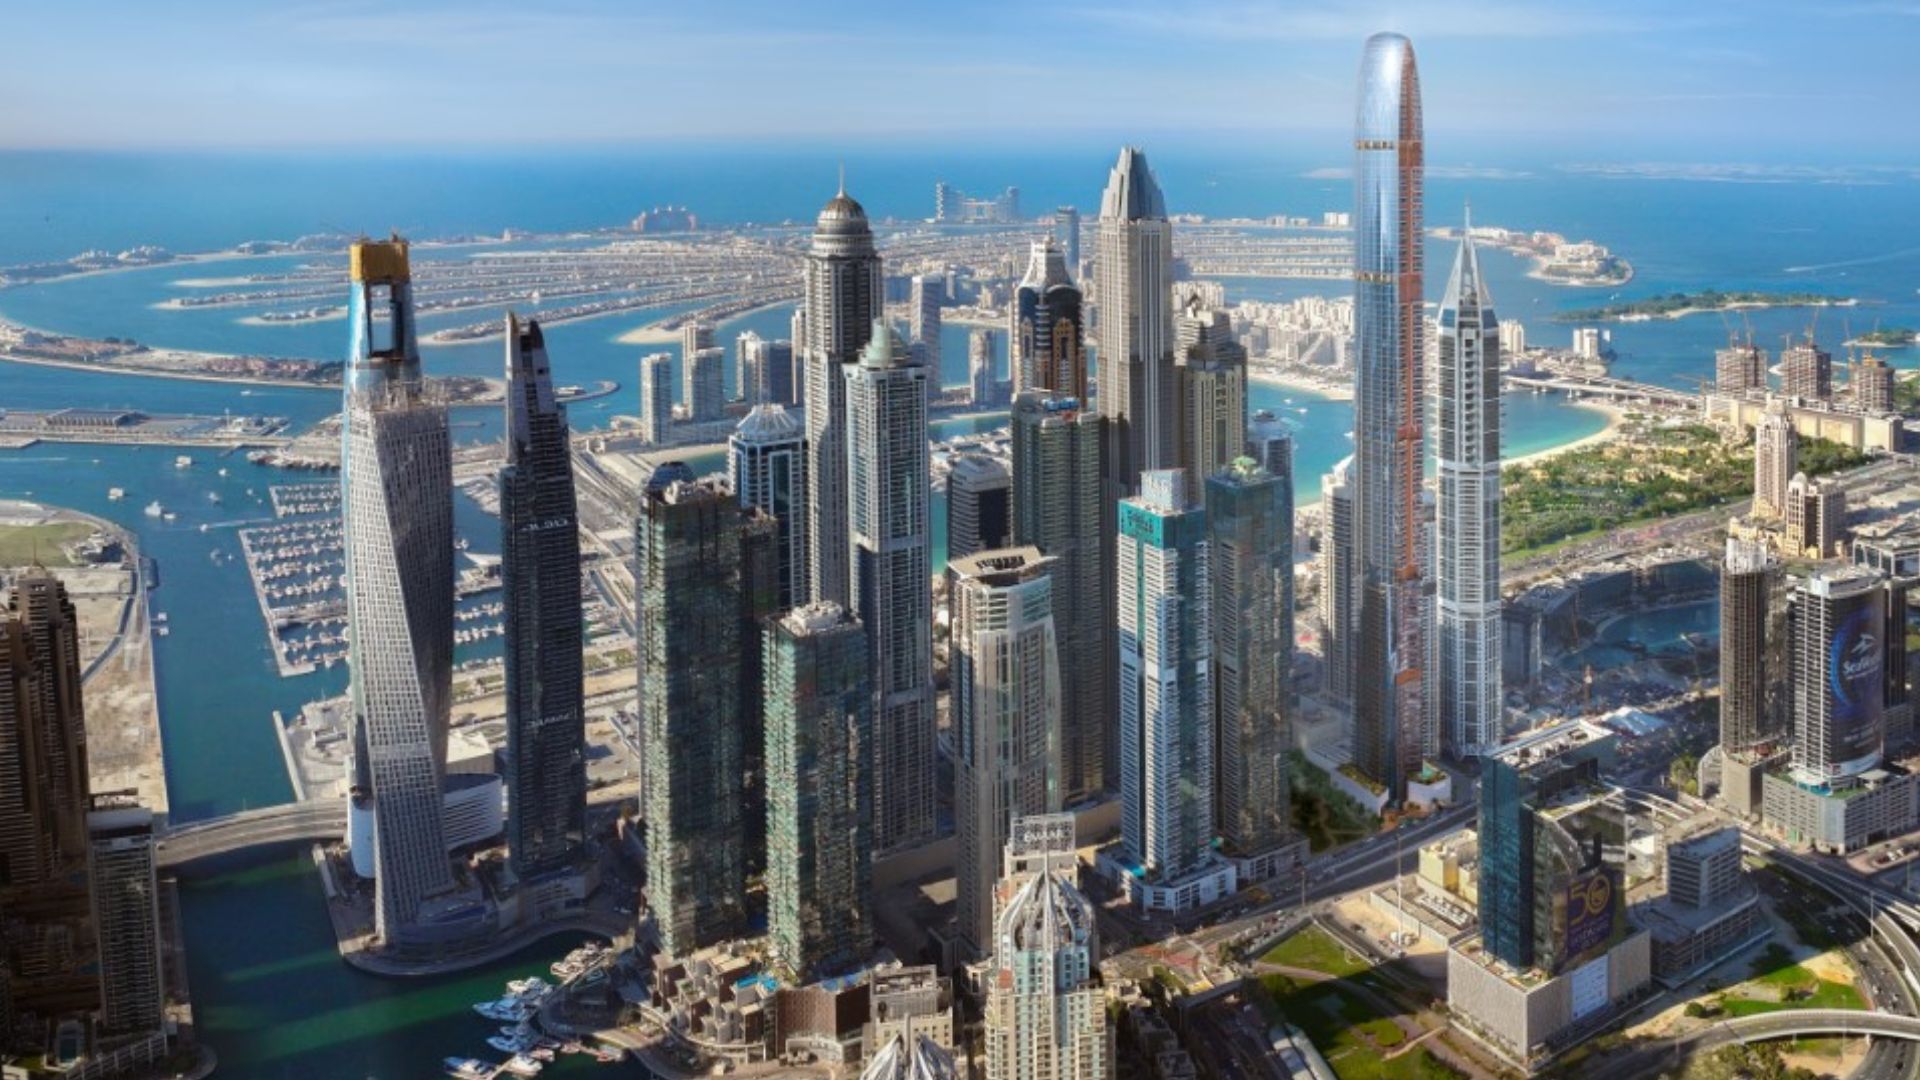 Dubai to get 122-story high, worlds tallest residential tower [Video]